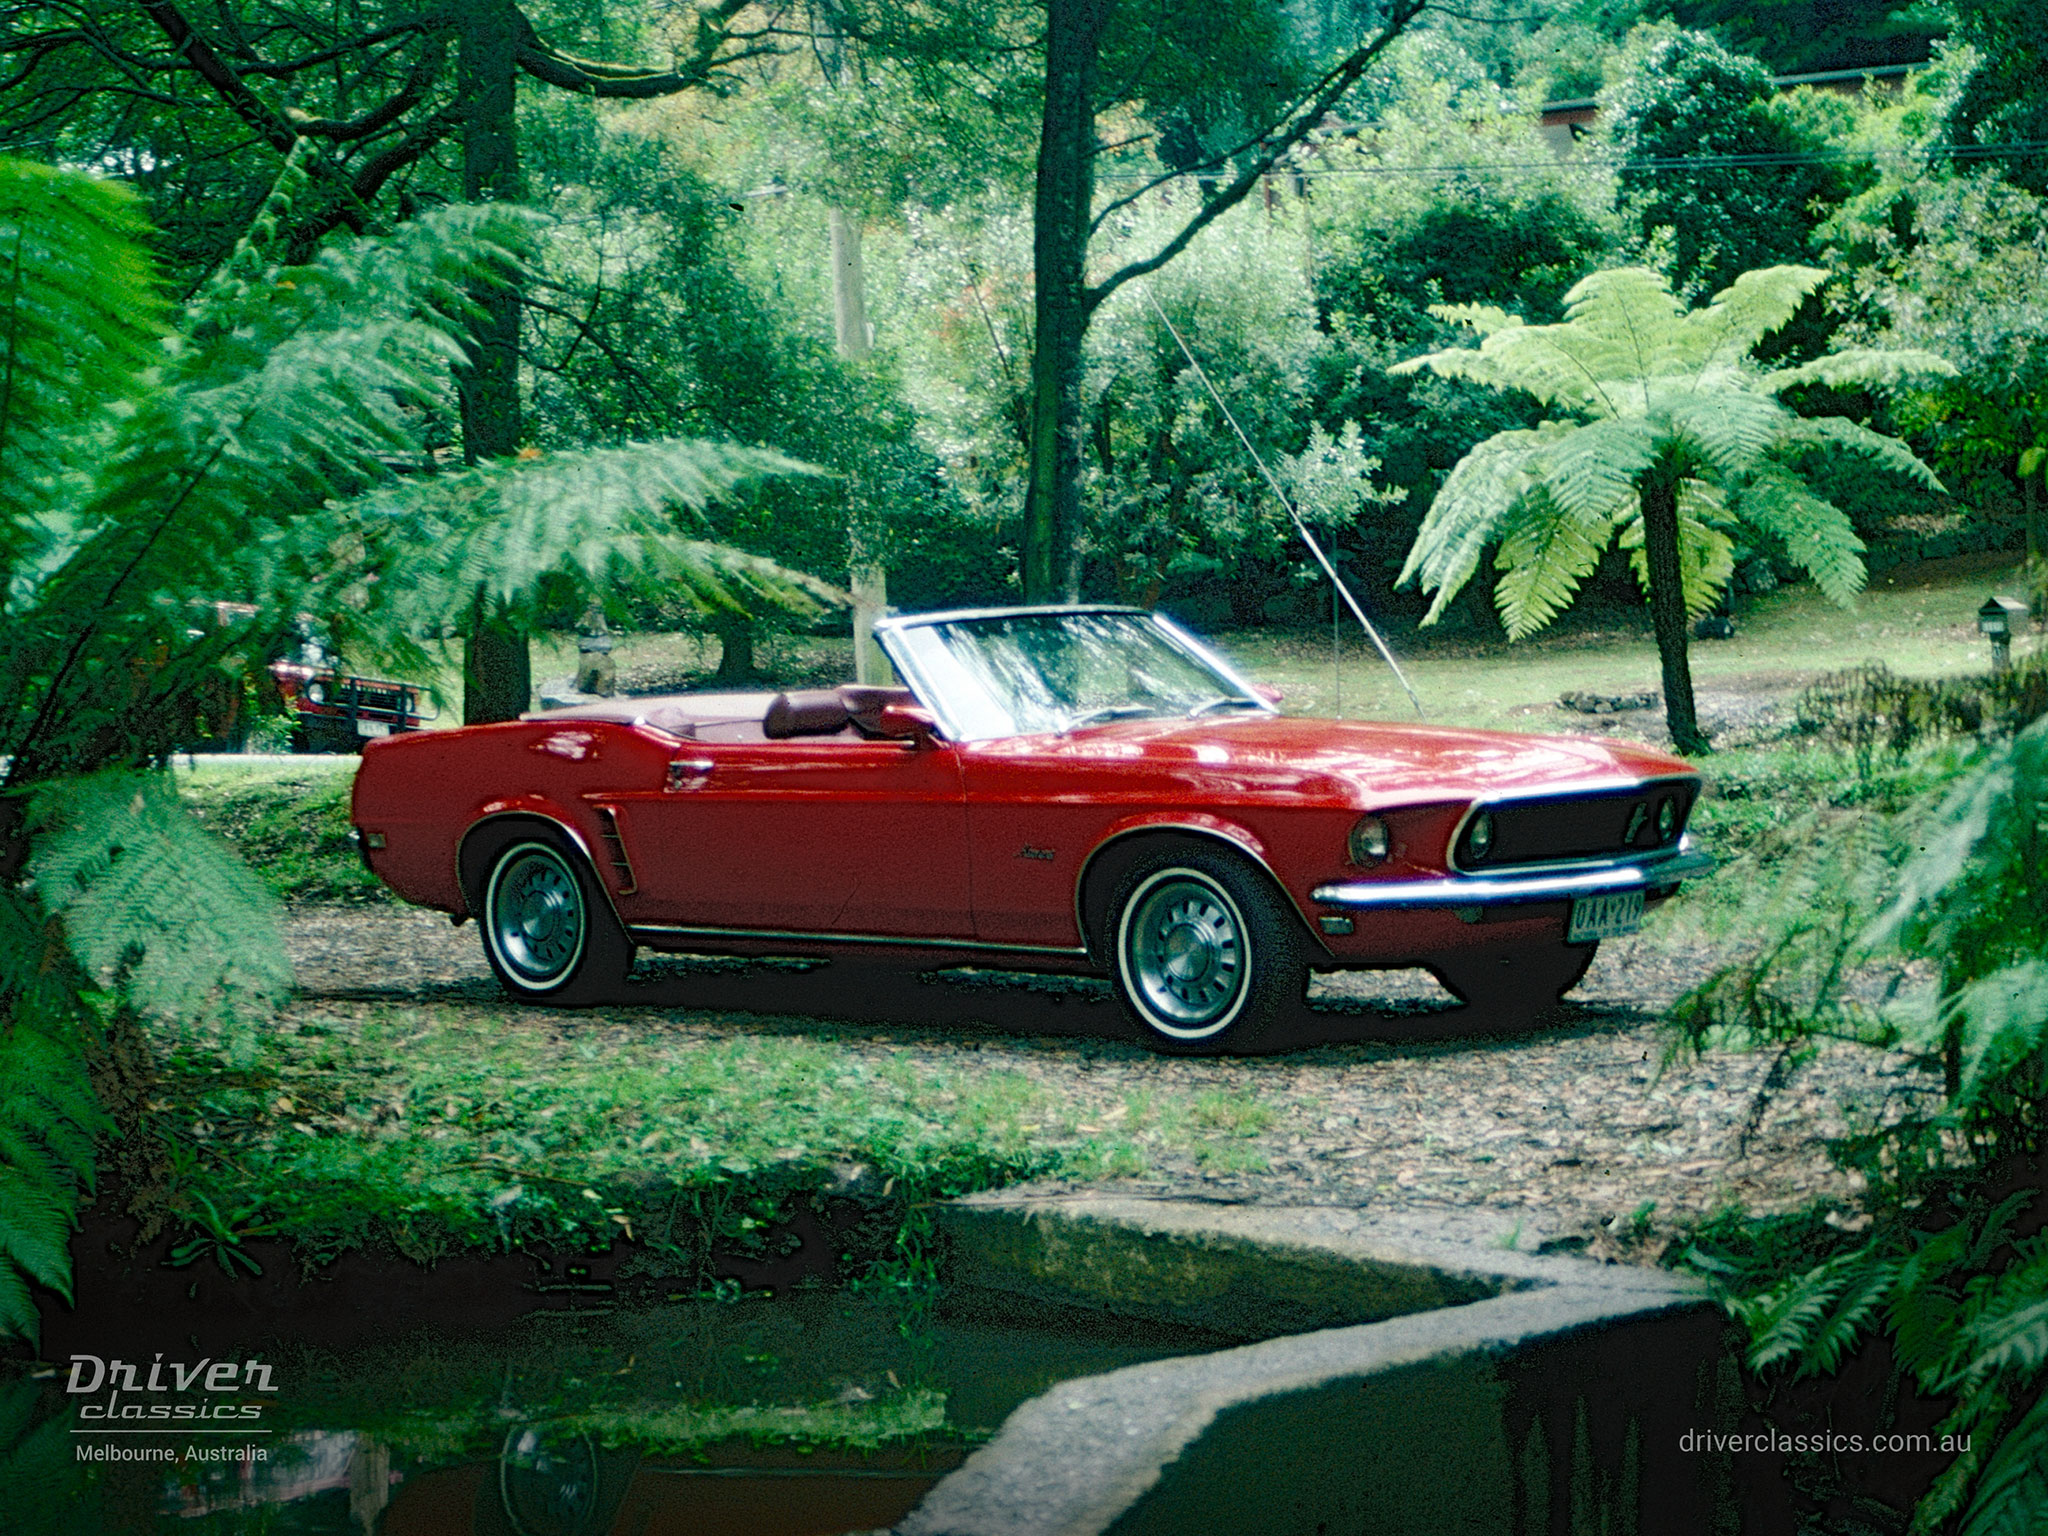 Ford Mustang (1969 model) Convertible, right side and front, Photo taken in the Dandenong Ranges VIC in 1998.